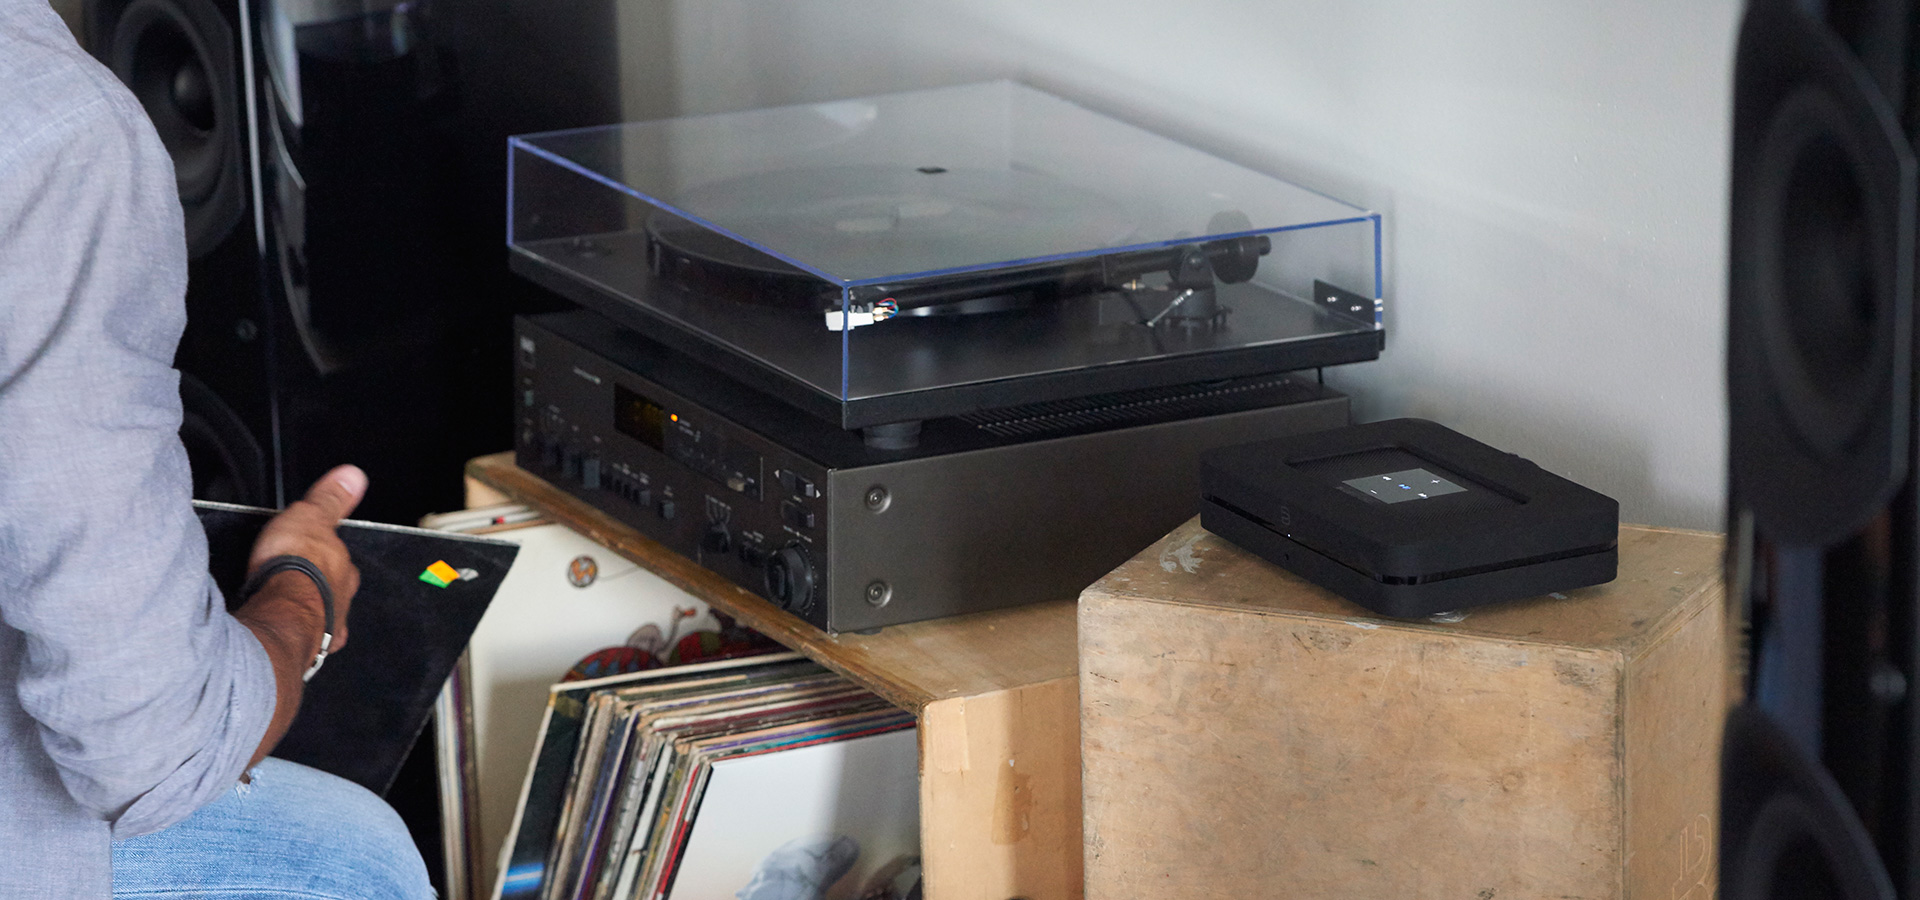 NODE2 wirelessly connected to a stereo with turntable